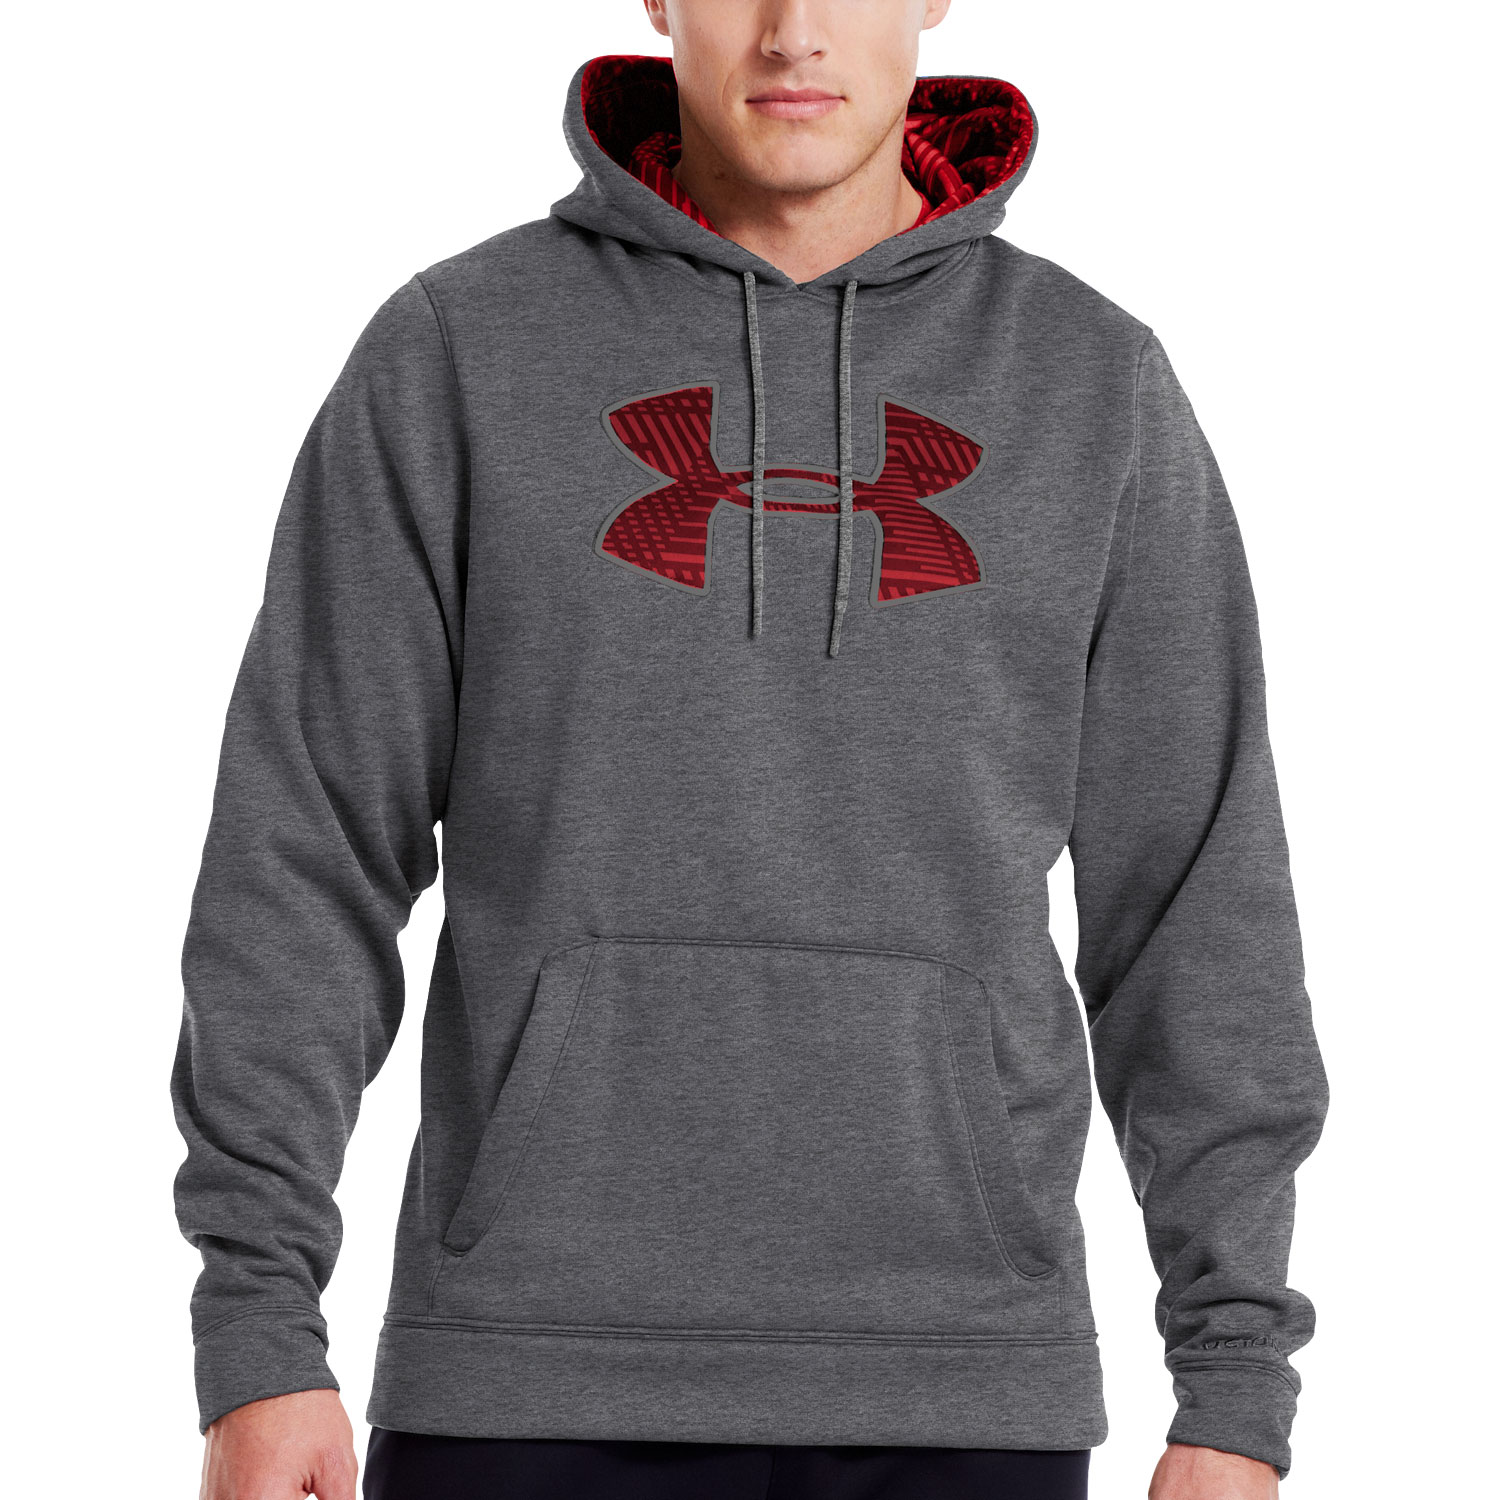 under armour pullover jacket